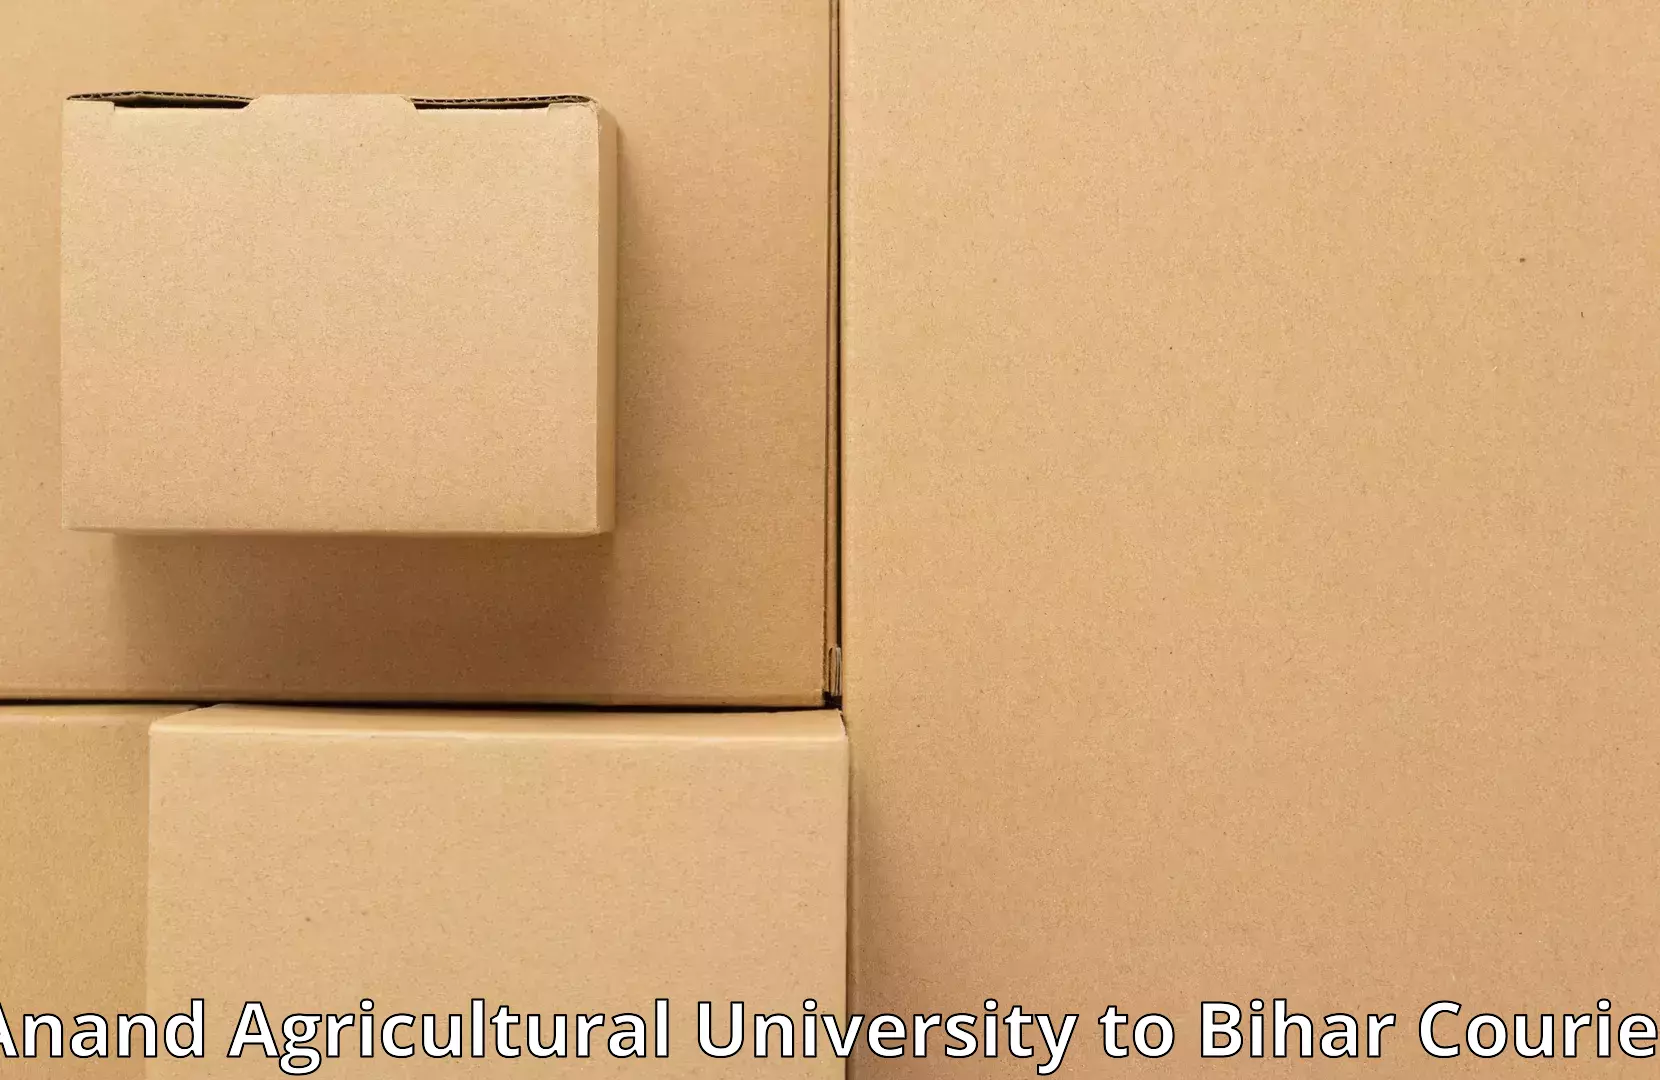 Efficient furniture relocation Anand Agricultural University to Tekari